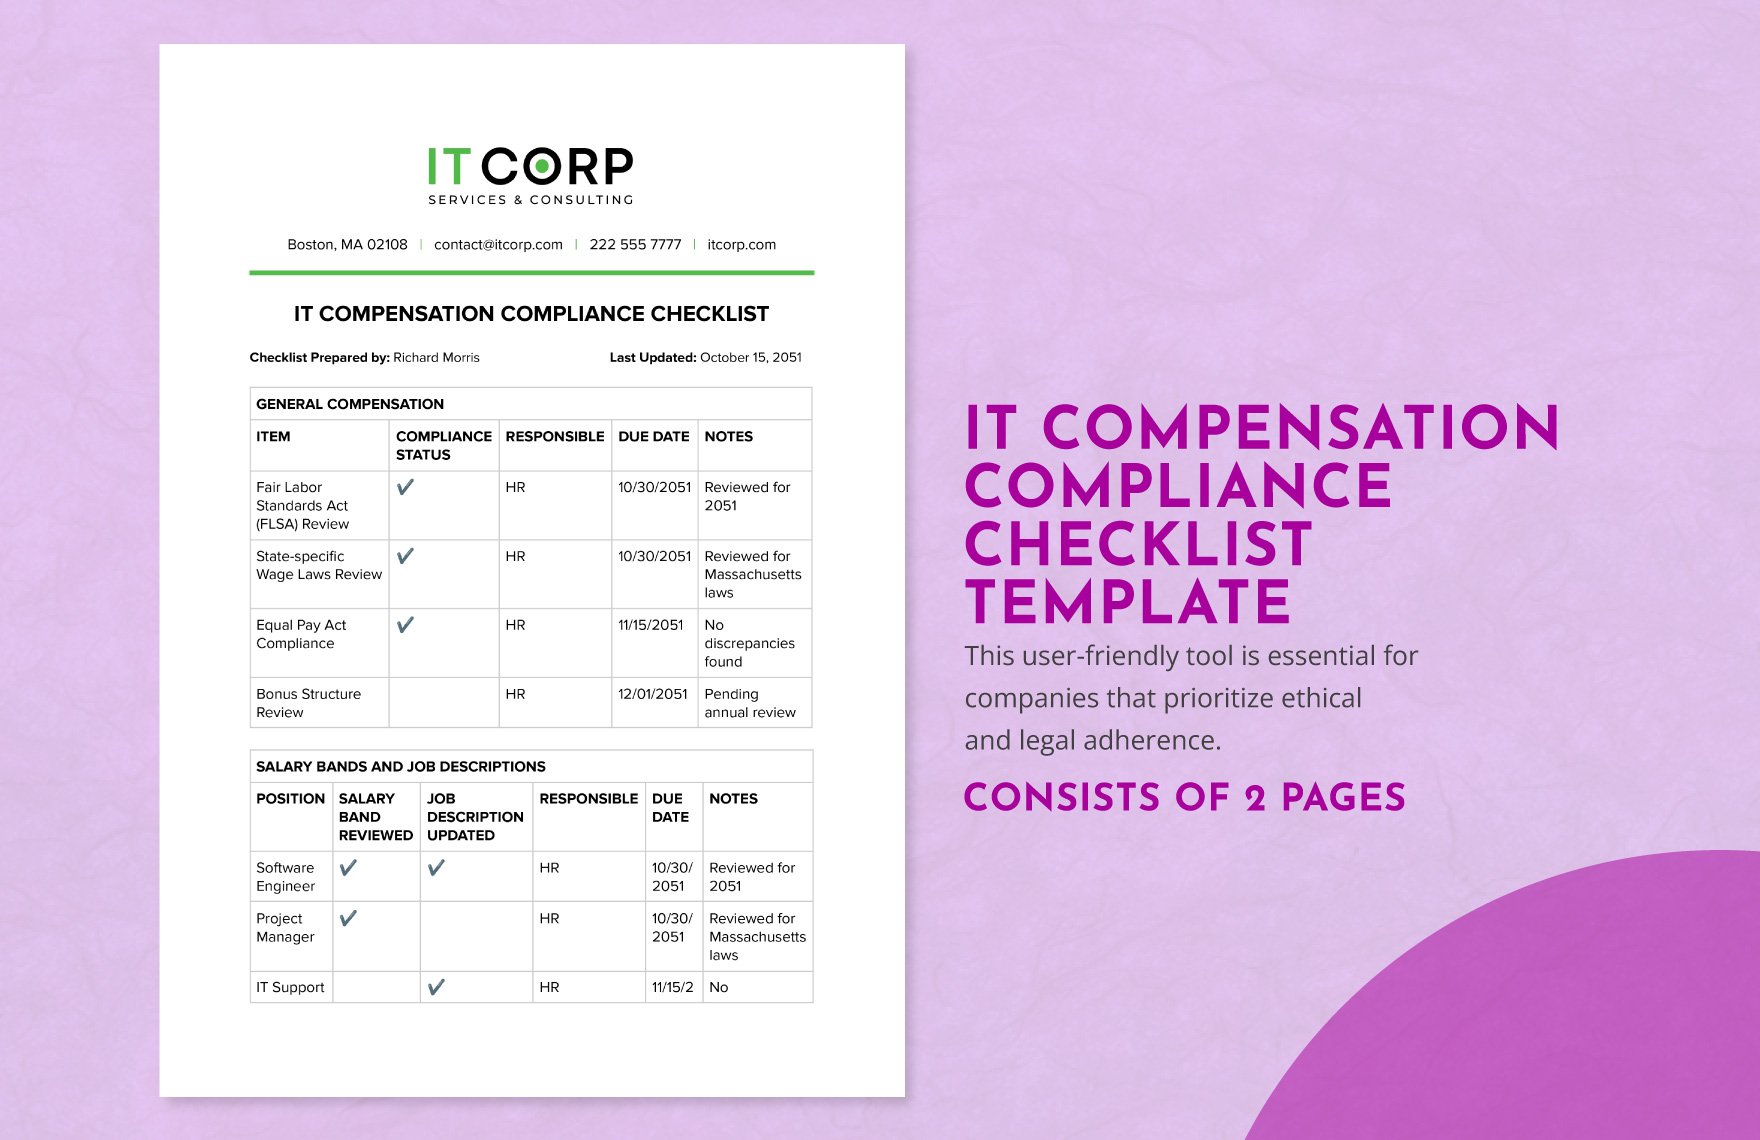 IT Compensation Compliance Checklist Template in Word, Google Docs, PDF